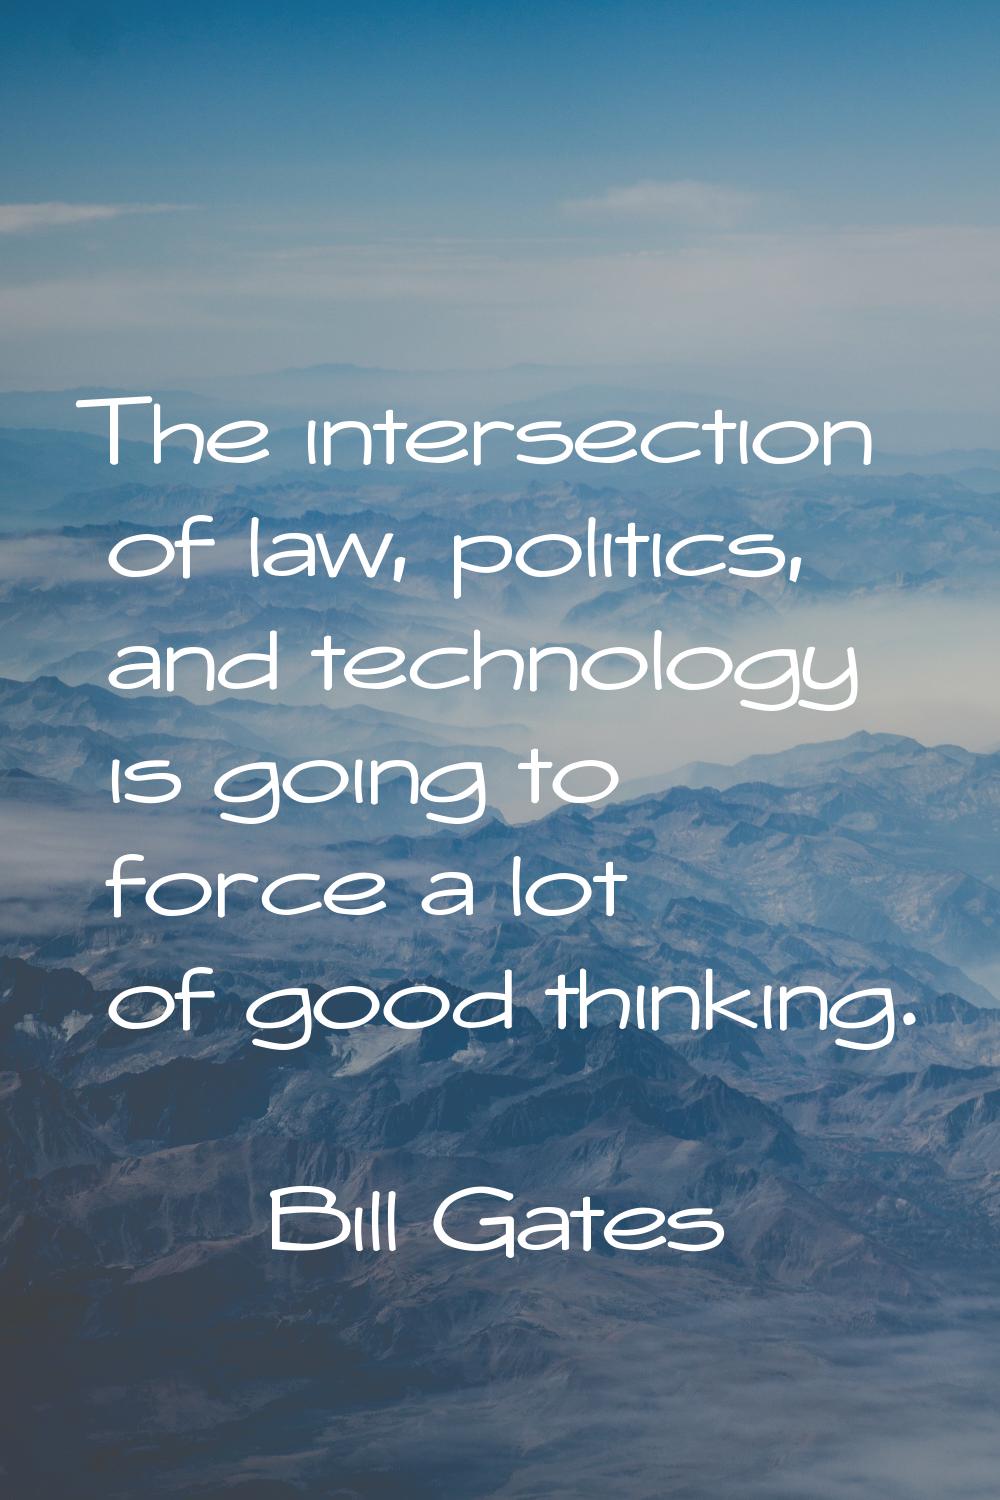 The intersection of law, politics, and technology is going to force a lot of good thinking.